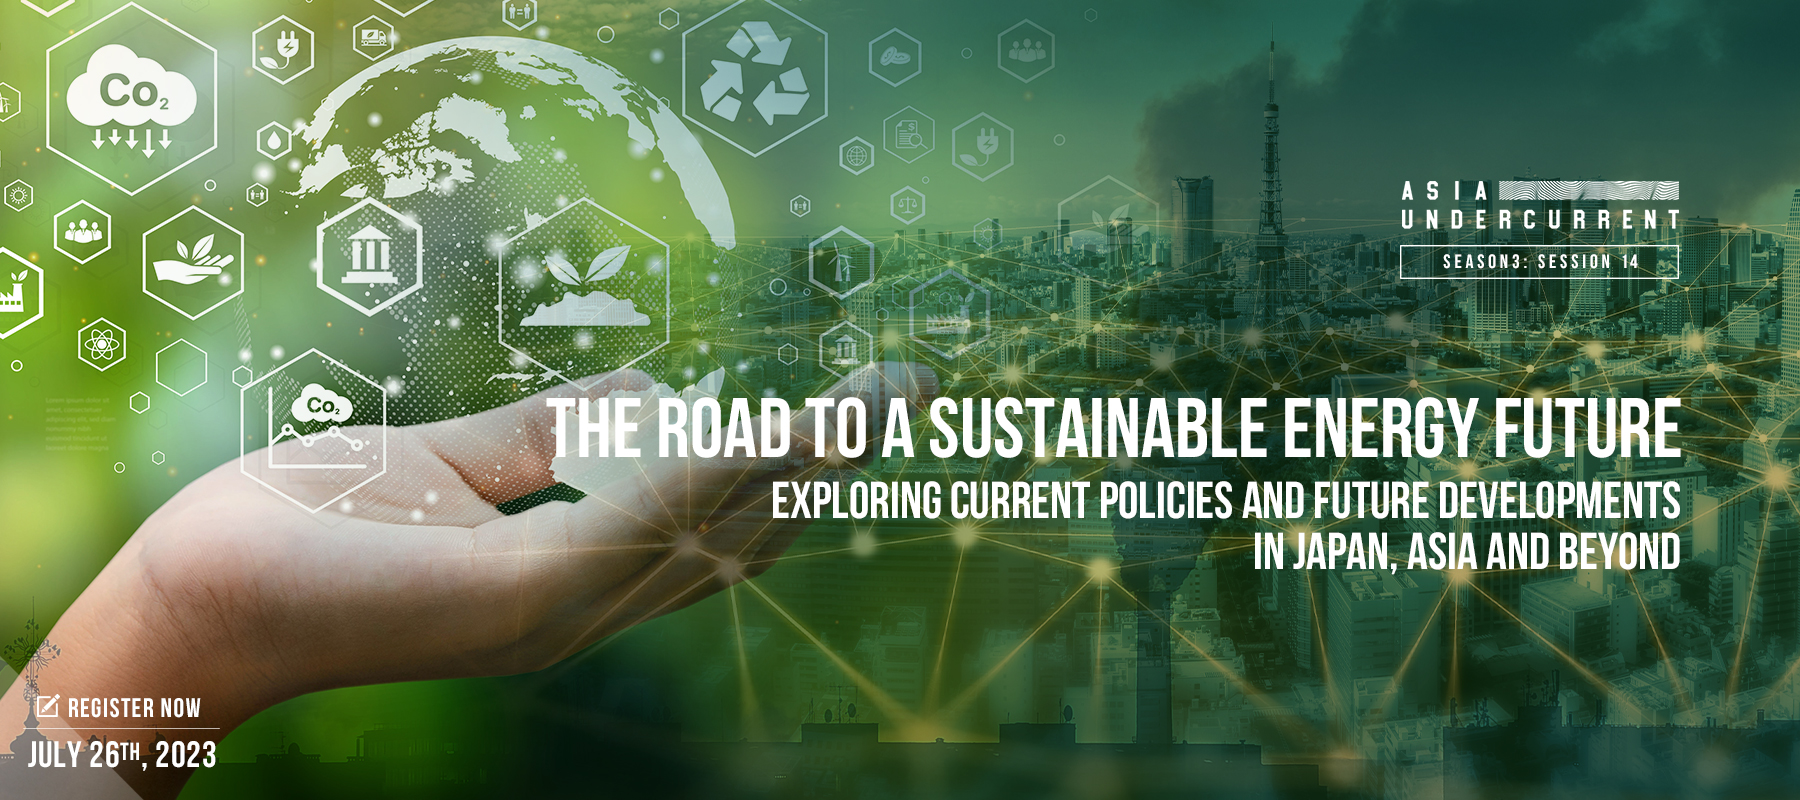 JThe Road to a Sustainable Energy Future: Exploring current policies and future developments in Japan, Asia and beyond